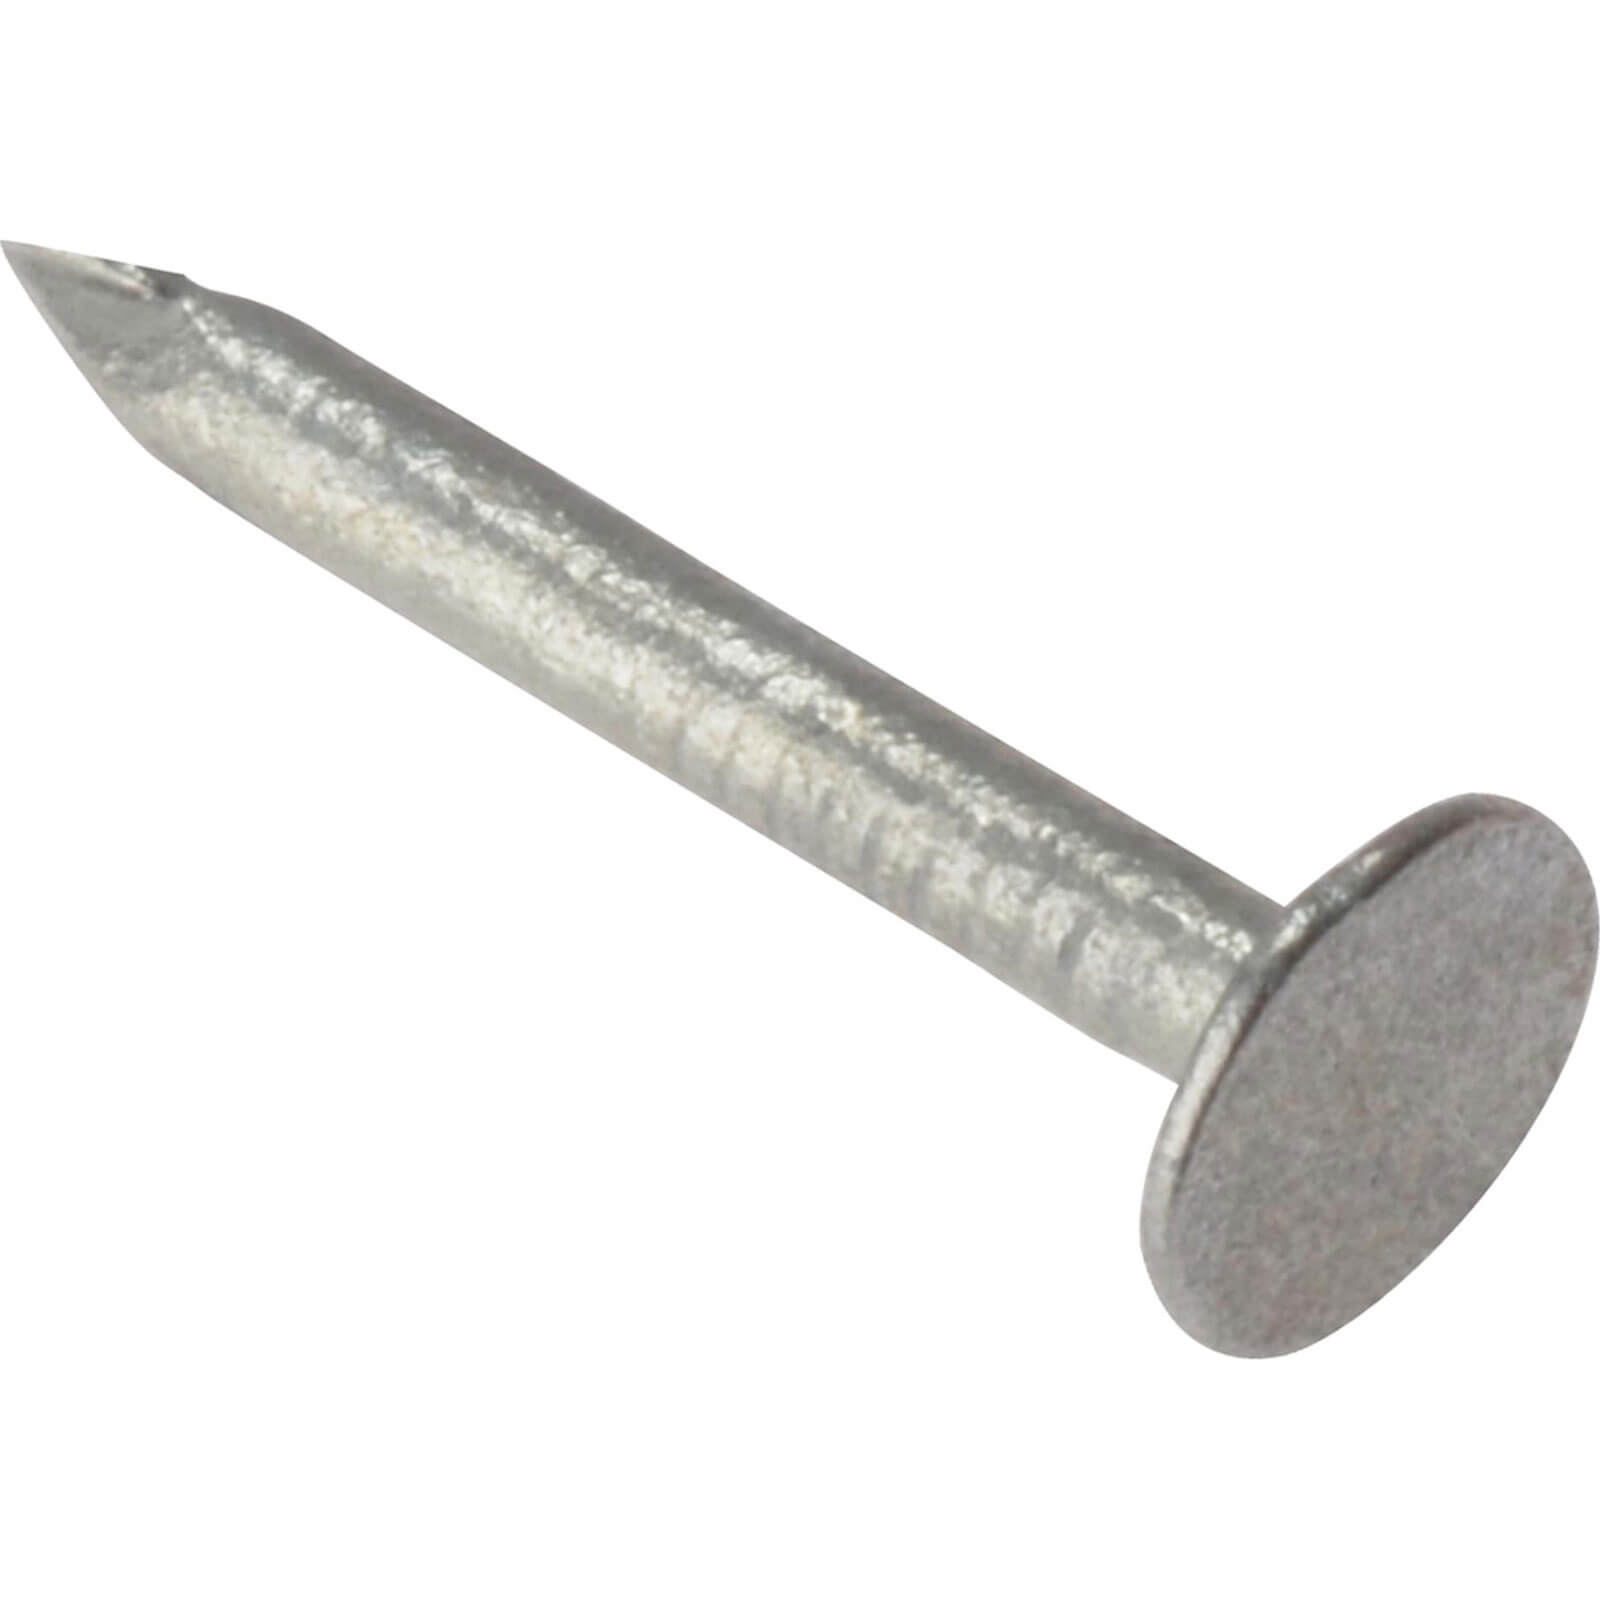 Image of Forgefix Multipurpose Galvanised Clout Nails 30mm 2.5kg